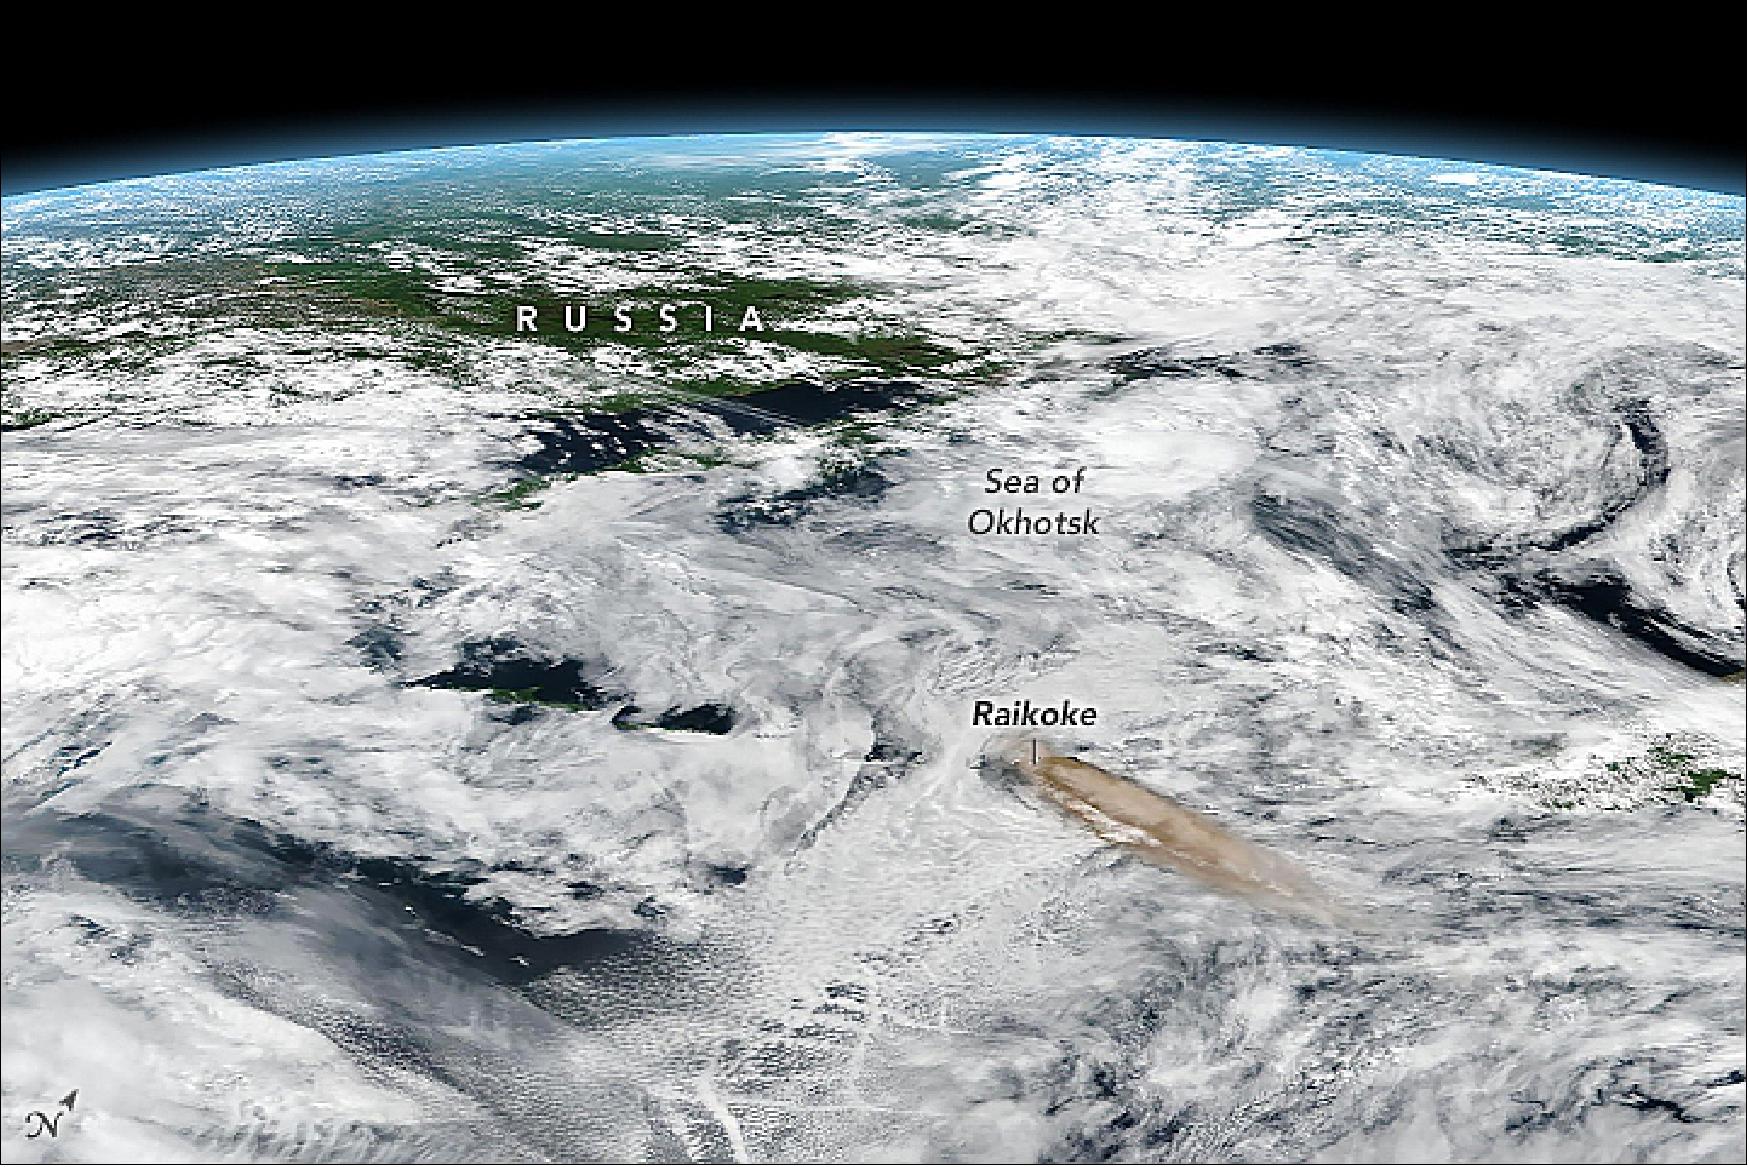 Figure 30: This image is an oblique composite view based on data from VIIRS (Visible Infrared Imaging Radiometer Suite) on Suomi NPP (image credit: NASA Earth Observatory, image by Joshua Stevens, using VIIRS data of the Suomi National Polar-orbiting Partnership)